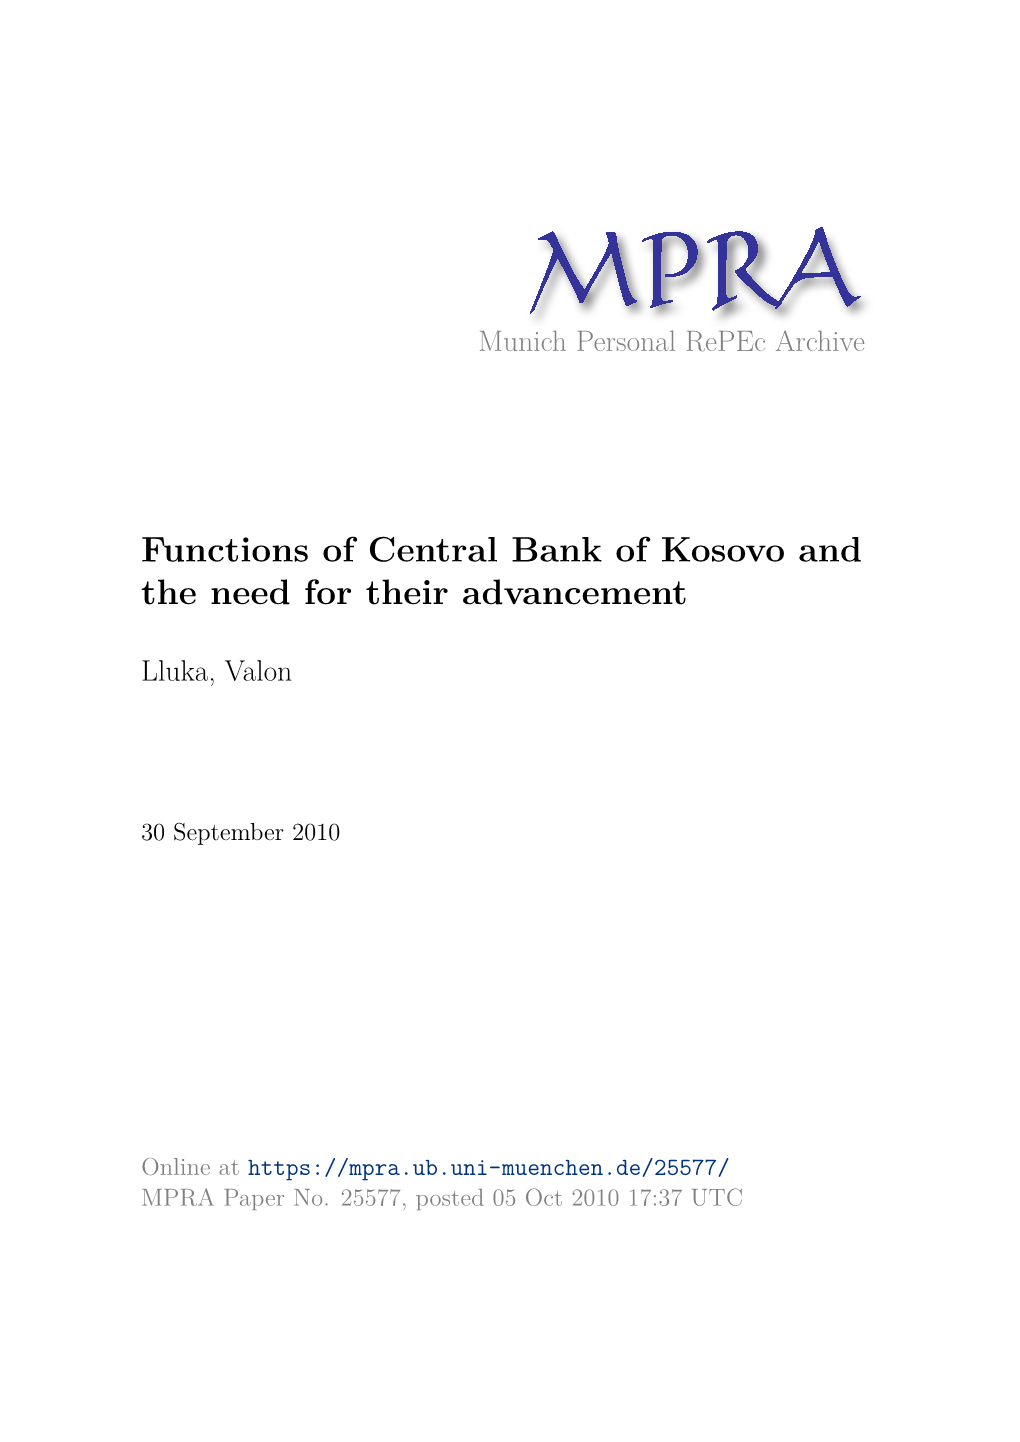 Functions of Central Bank of Kosovo and the Need for Their Advancement